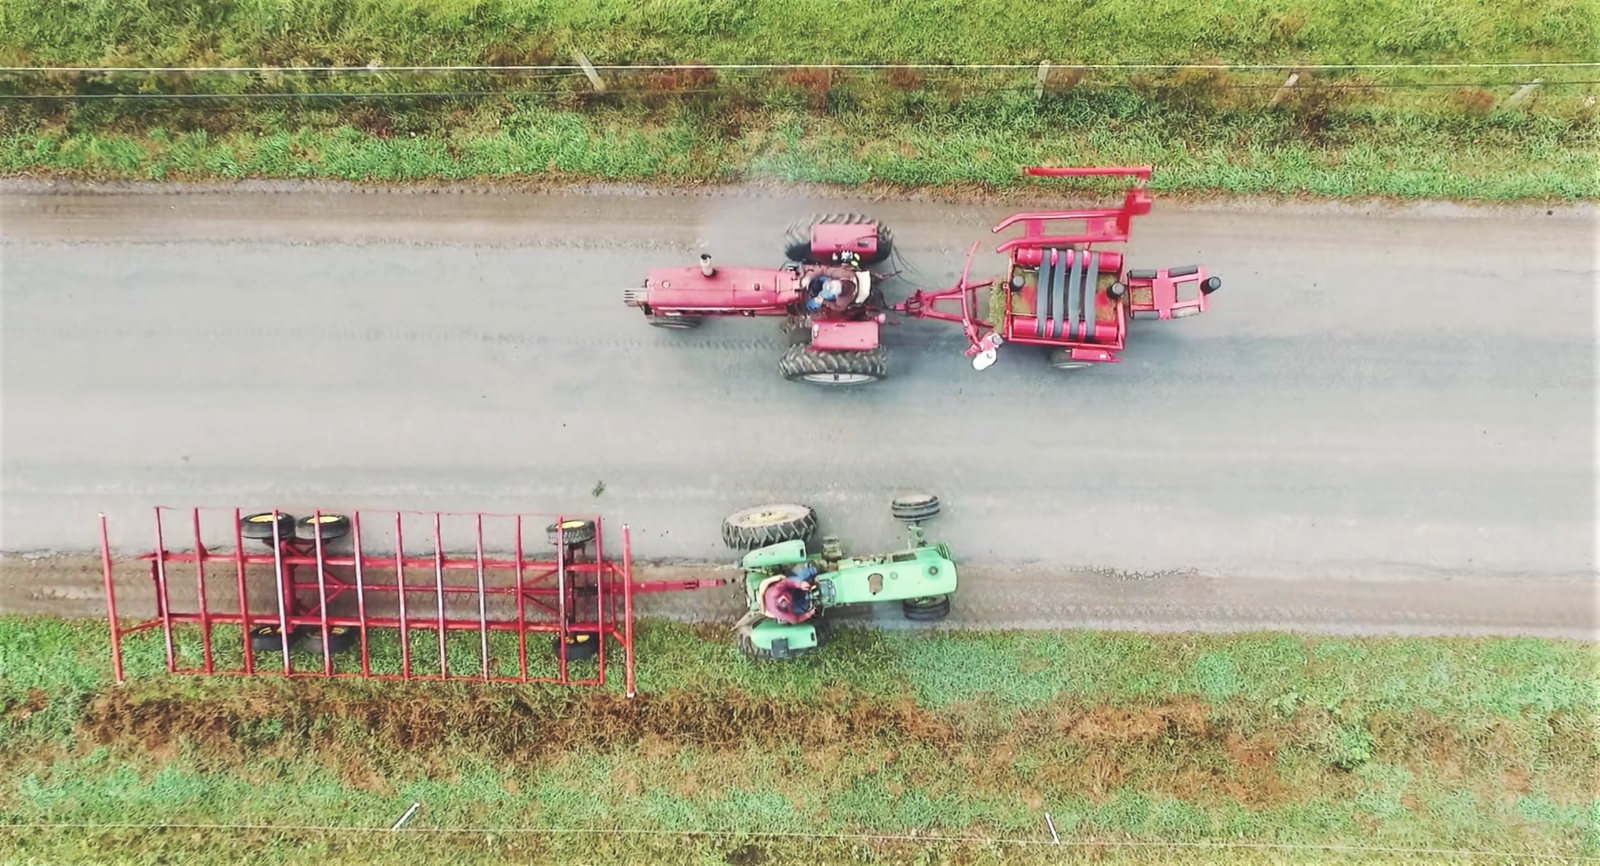 Neighbors stop their tractors to chat in Richfield Springs, New York.